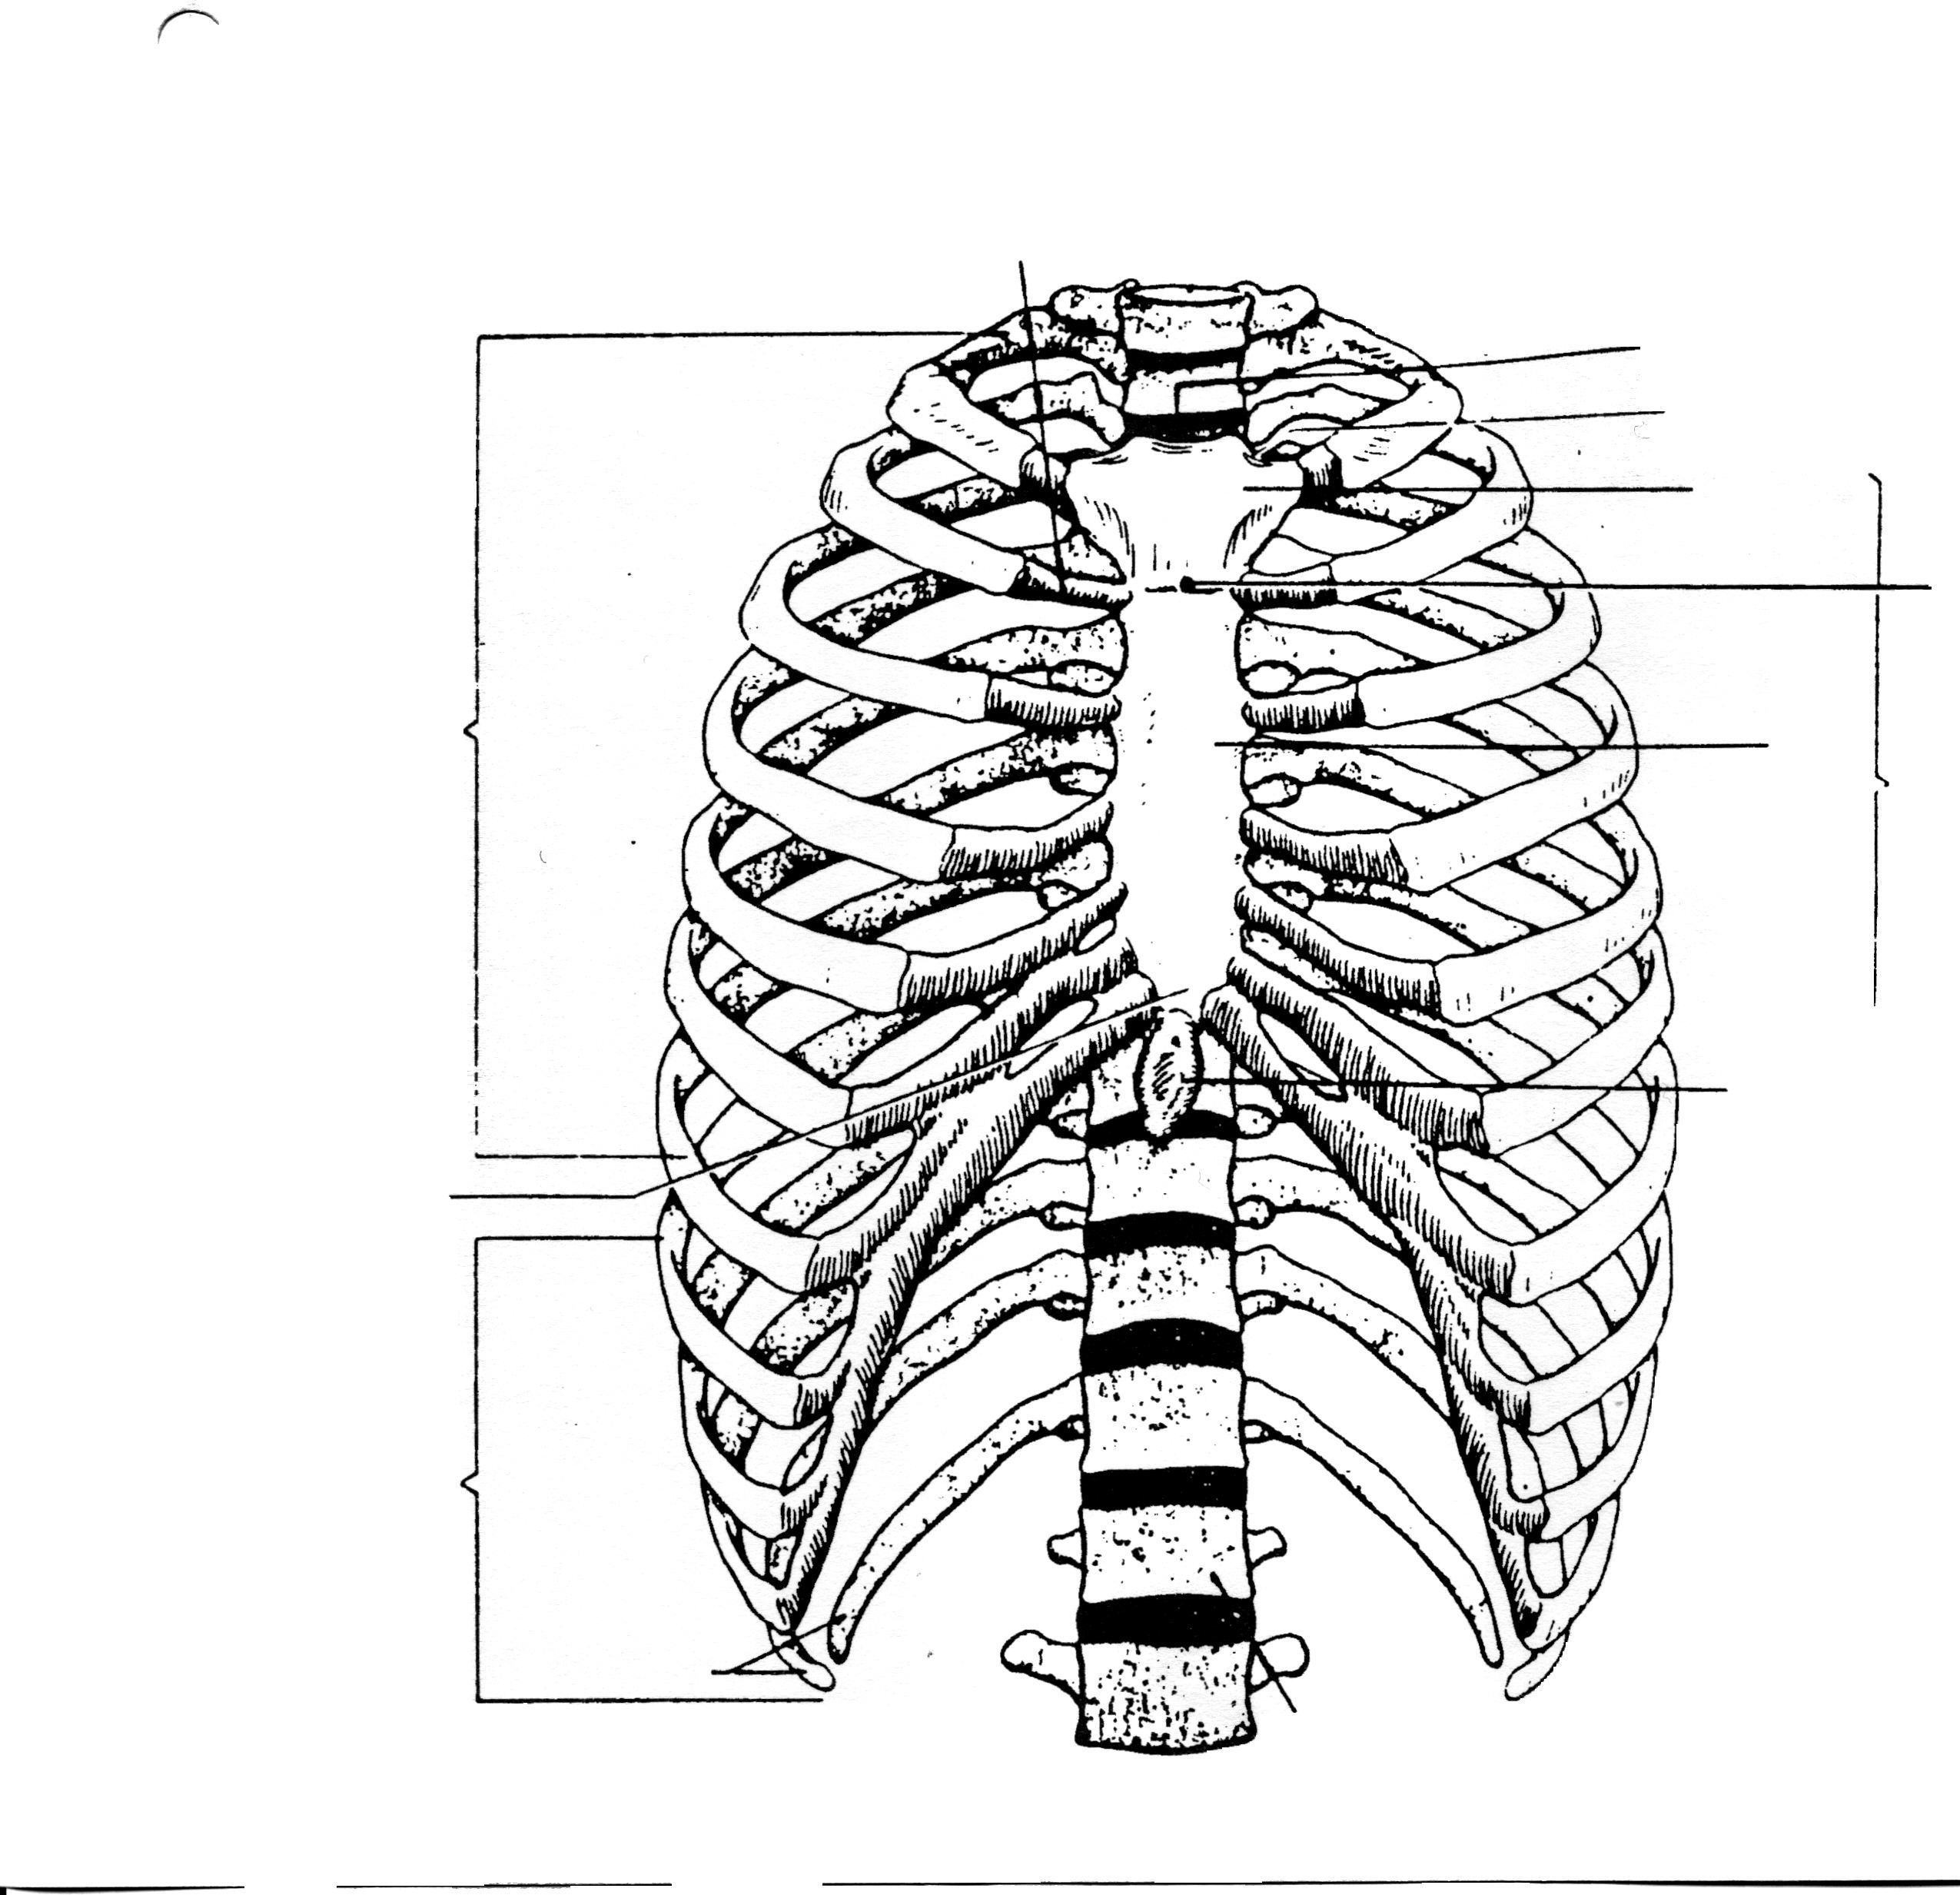 Anatomy And Physiology Coloring Pages Free - Coloring Home